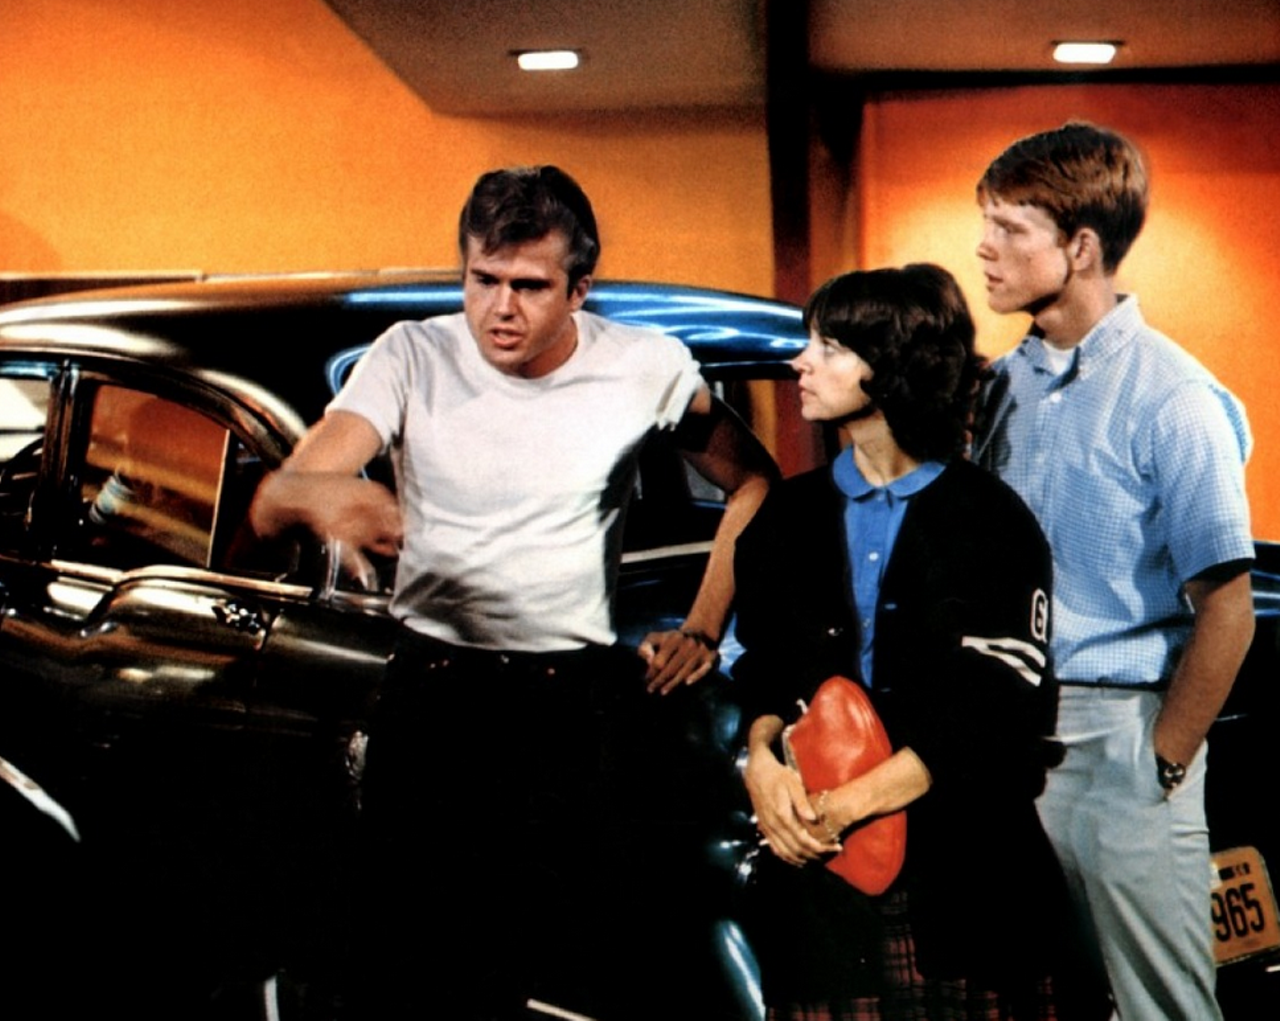 2. American Graffiti (1973)George Lucas' American Graffiti was filmed in 1972, but set in 1962 in California. Boasting a 97 percent fresh rating on Rotten Tomatoes, it was also nominated for Best Picture in '73, which it deserved: Never before had the aimless horniness of American teens been so sharply captured. Too bad it inspired dumb ol' Happy Days.